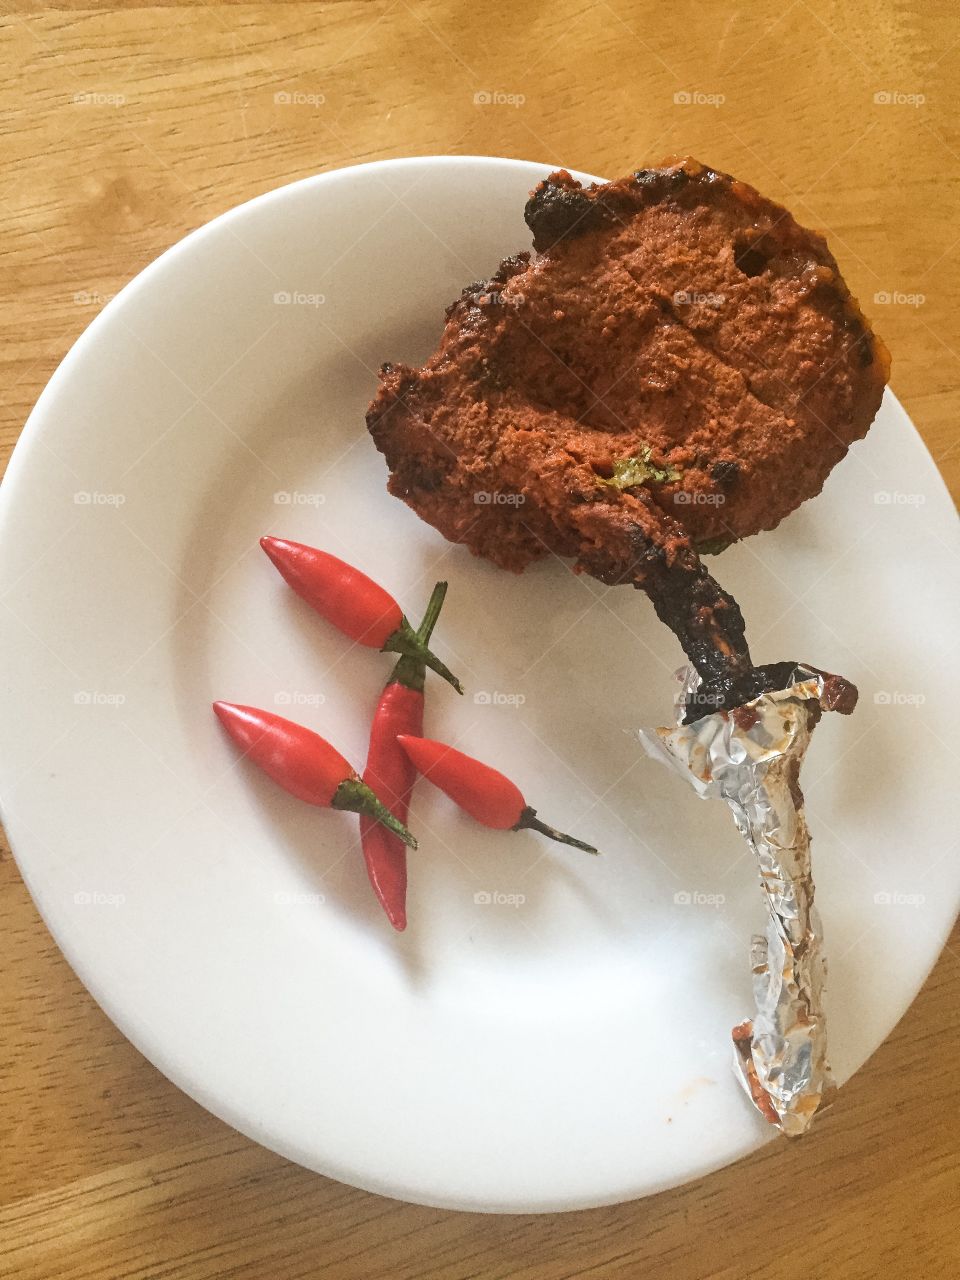 Chillies and lamb cutlet. 